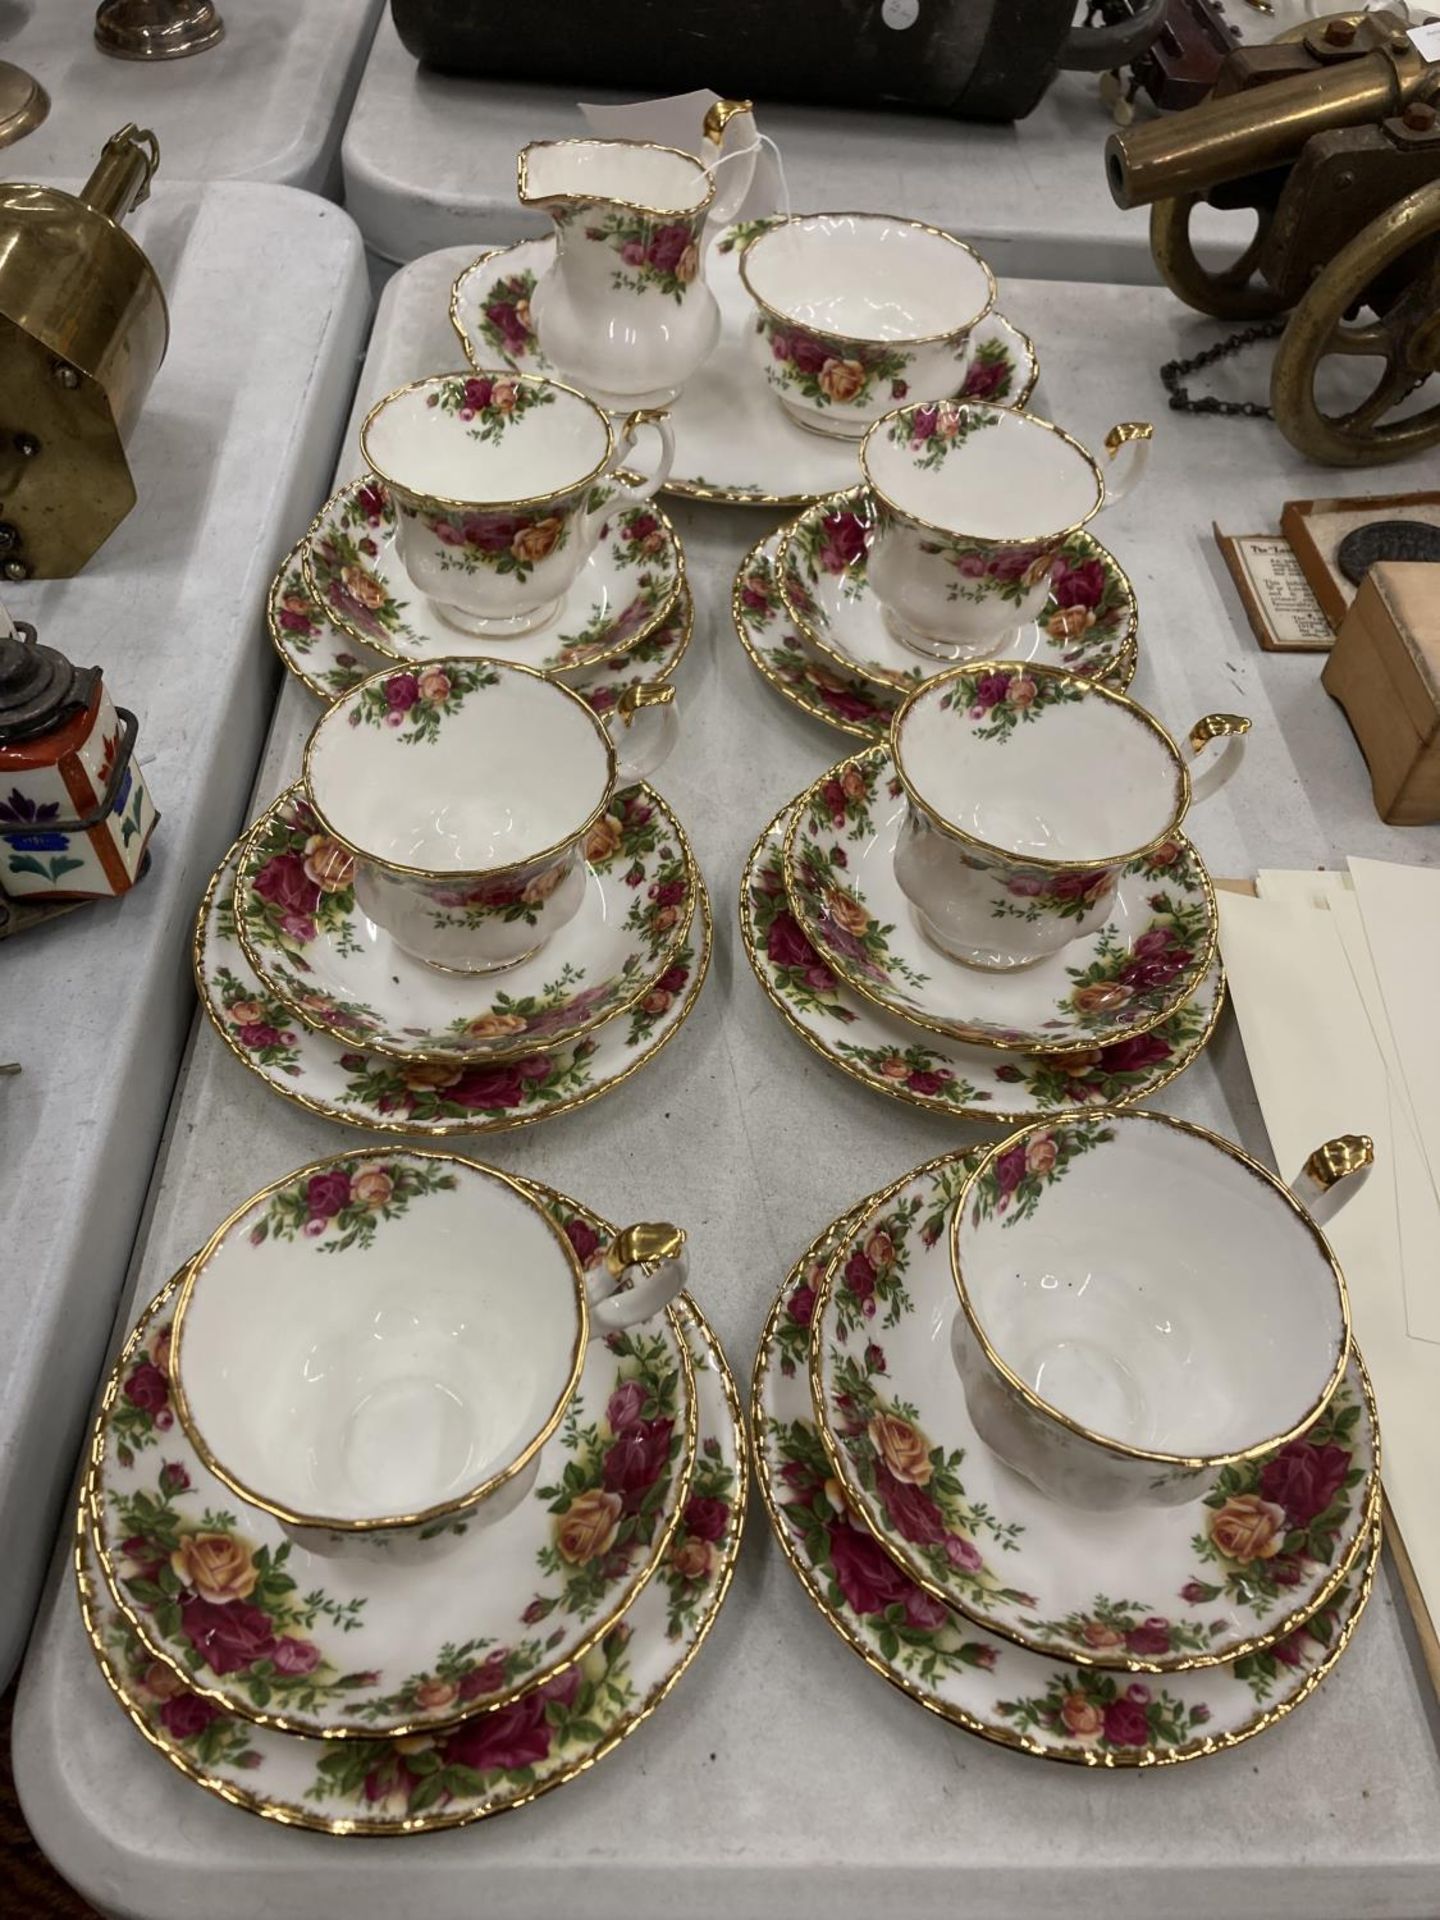 A QUANTITY OF ROYAL ALBERT 'COLD COUNTRY ROSES' TO INCLUDE CUPS, SAUCERS, SIDE PLATES, A CREAM